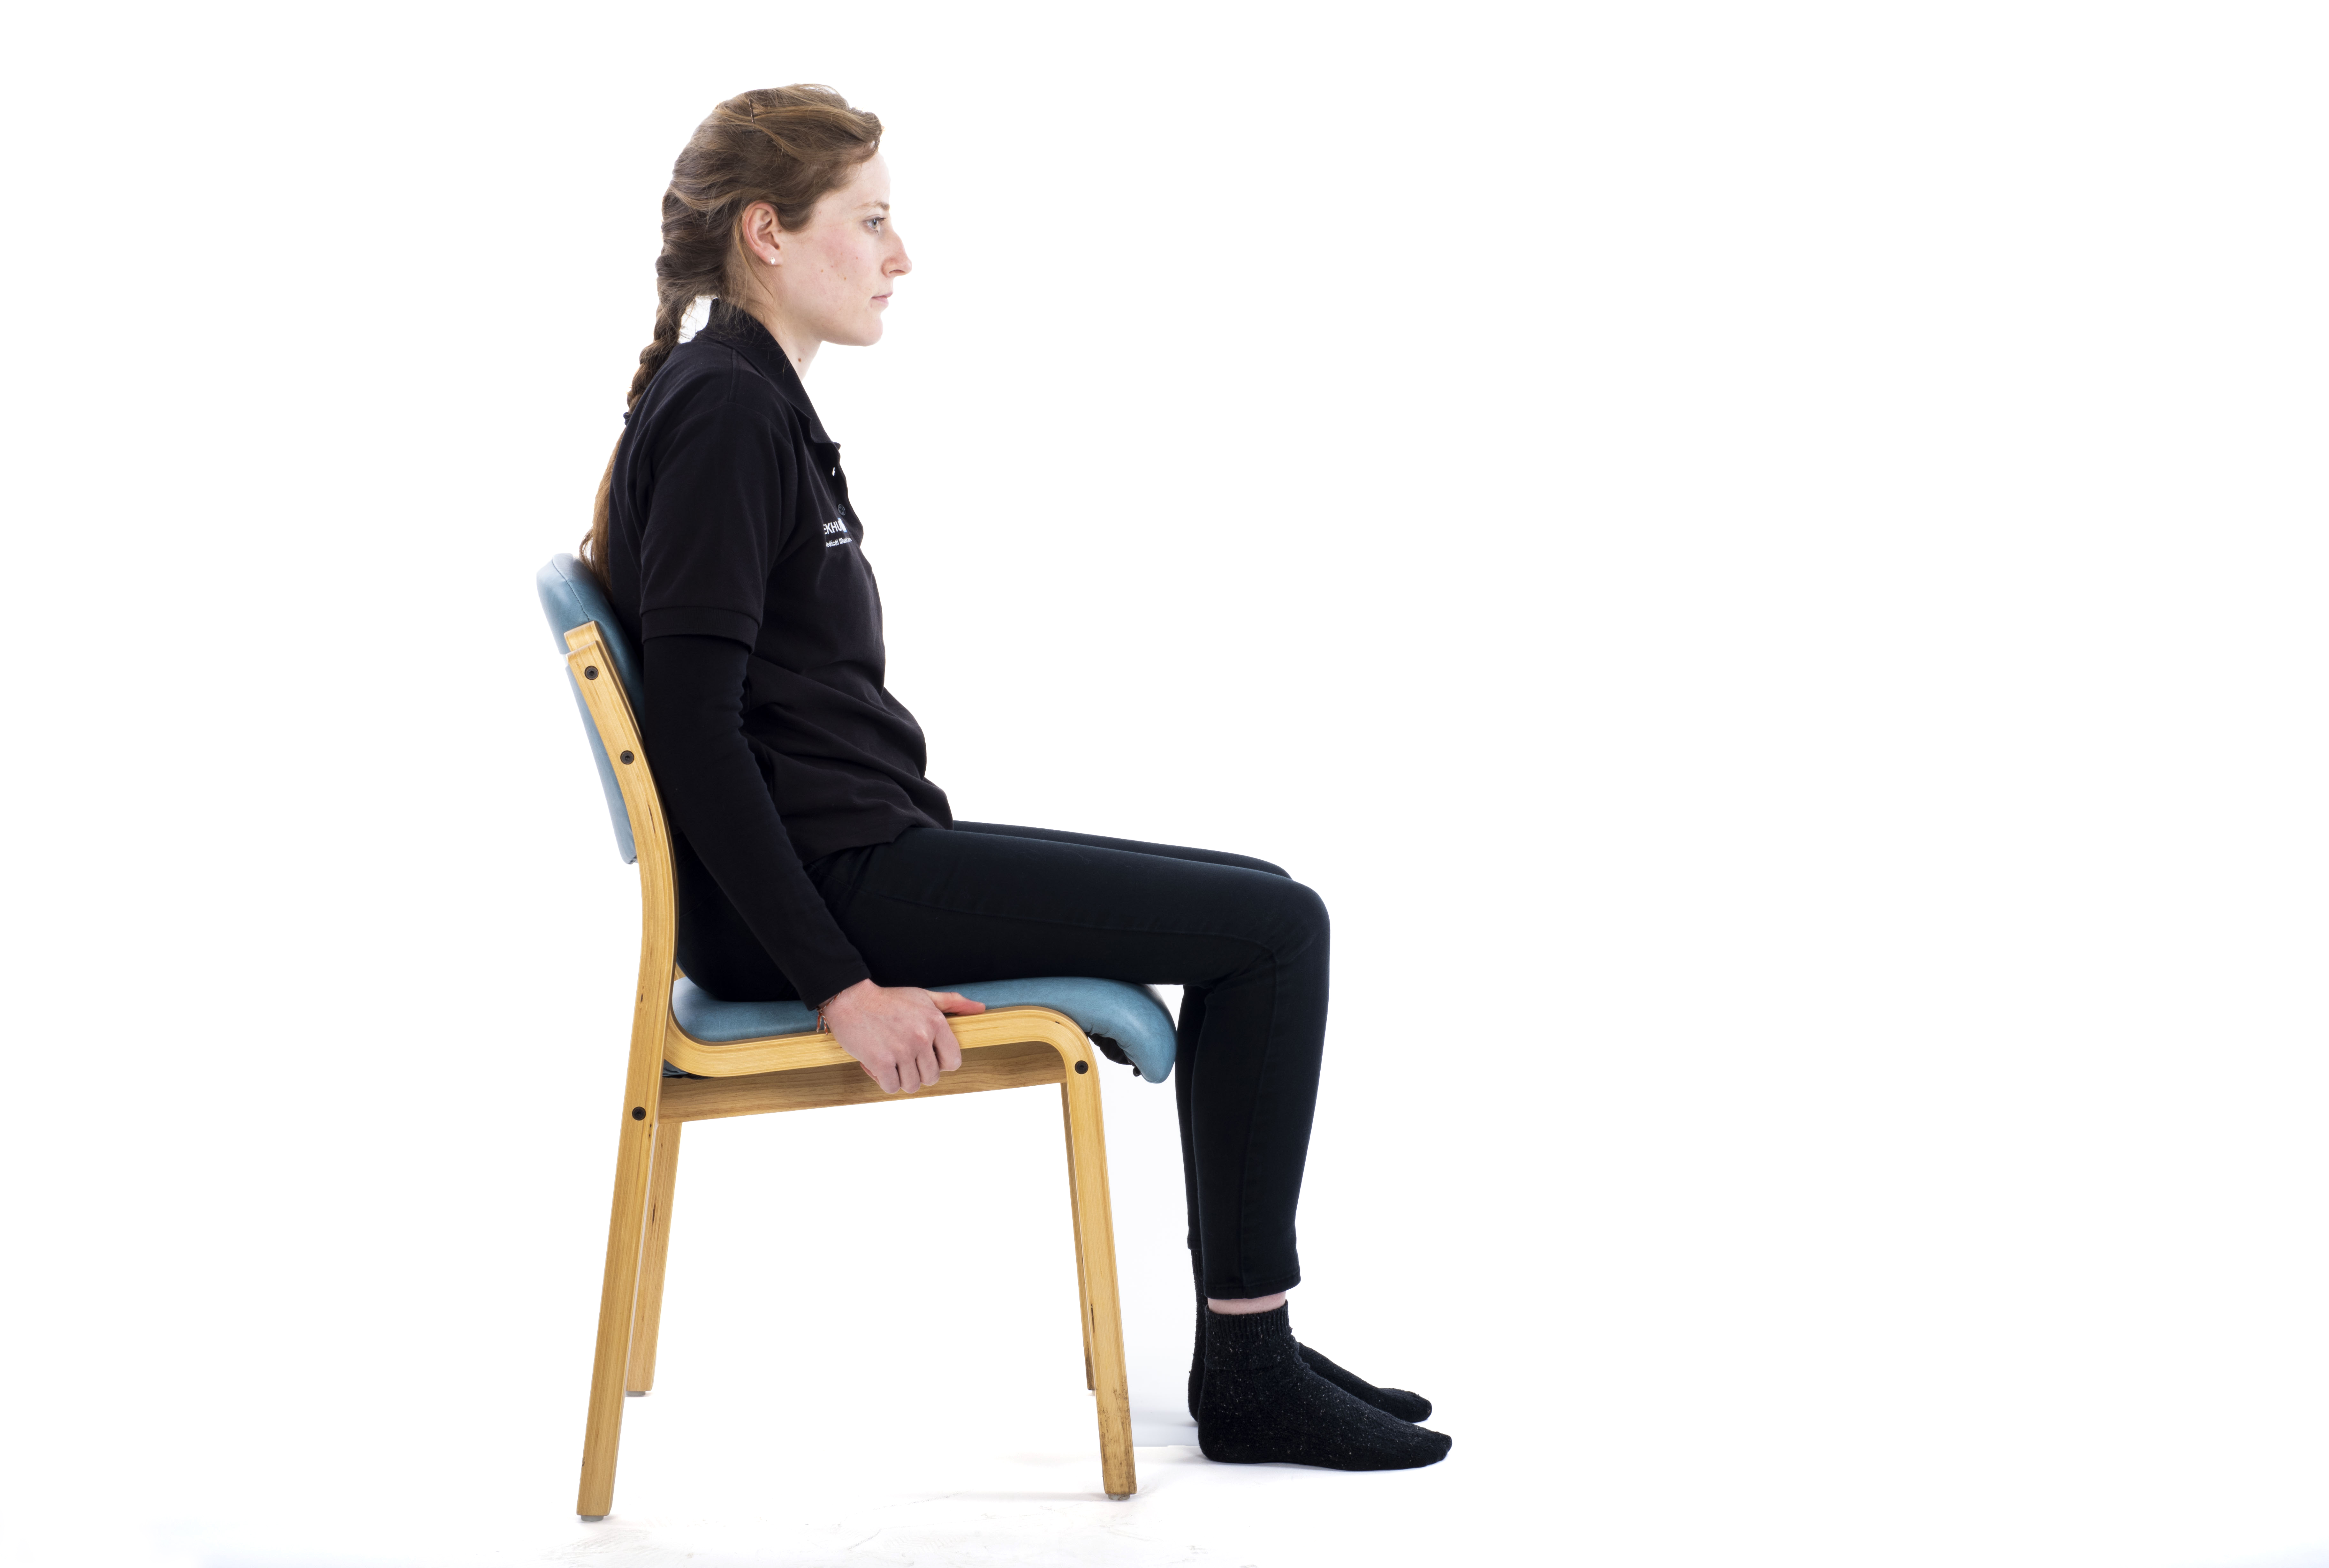 Knee flexion and extension exercise; sit on a chair, with your thigh well supported and your feet on the ground